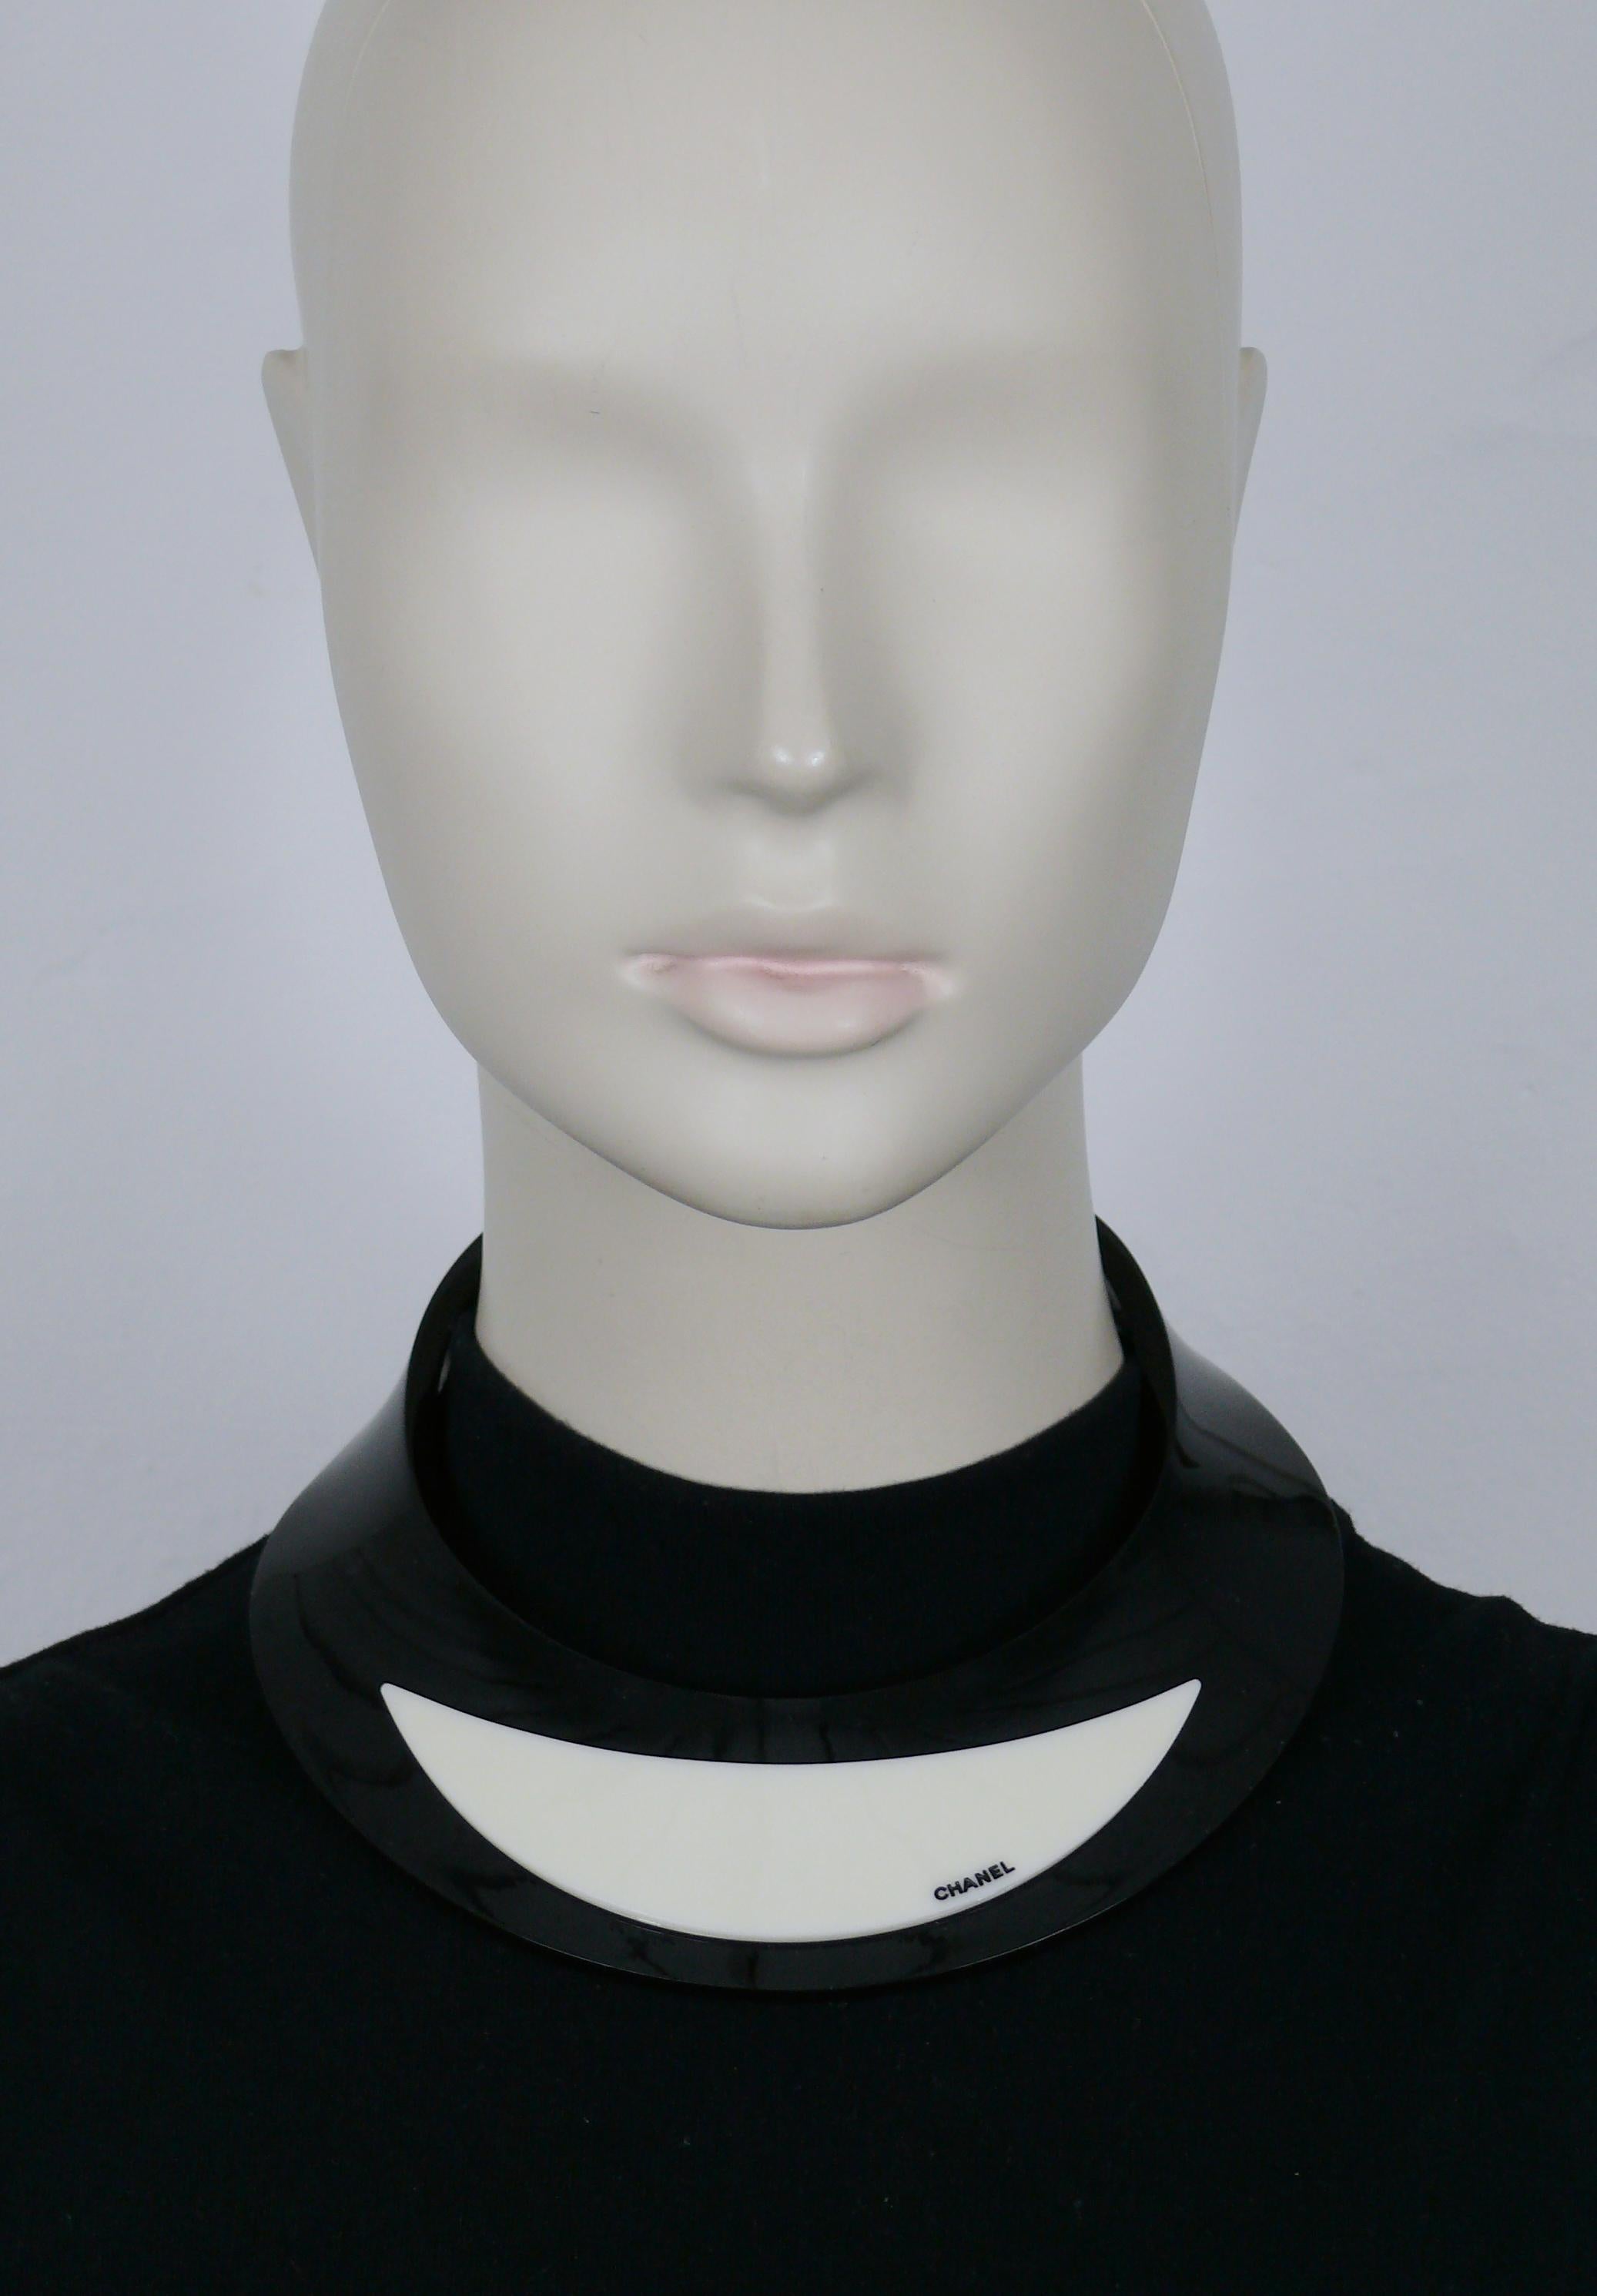 CHANEL by KARL LAGERFELD rigid black and off-white resin choker necklace embossed CHANEL.

From the Fall 2007 CHANEL Collection.

Embossed CHANEL 07 A Made in Italy.

Indicative measurements : inner circumference approx. 33.93 cm (13.36 inches) /